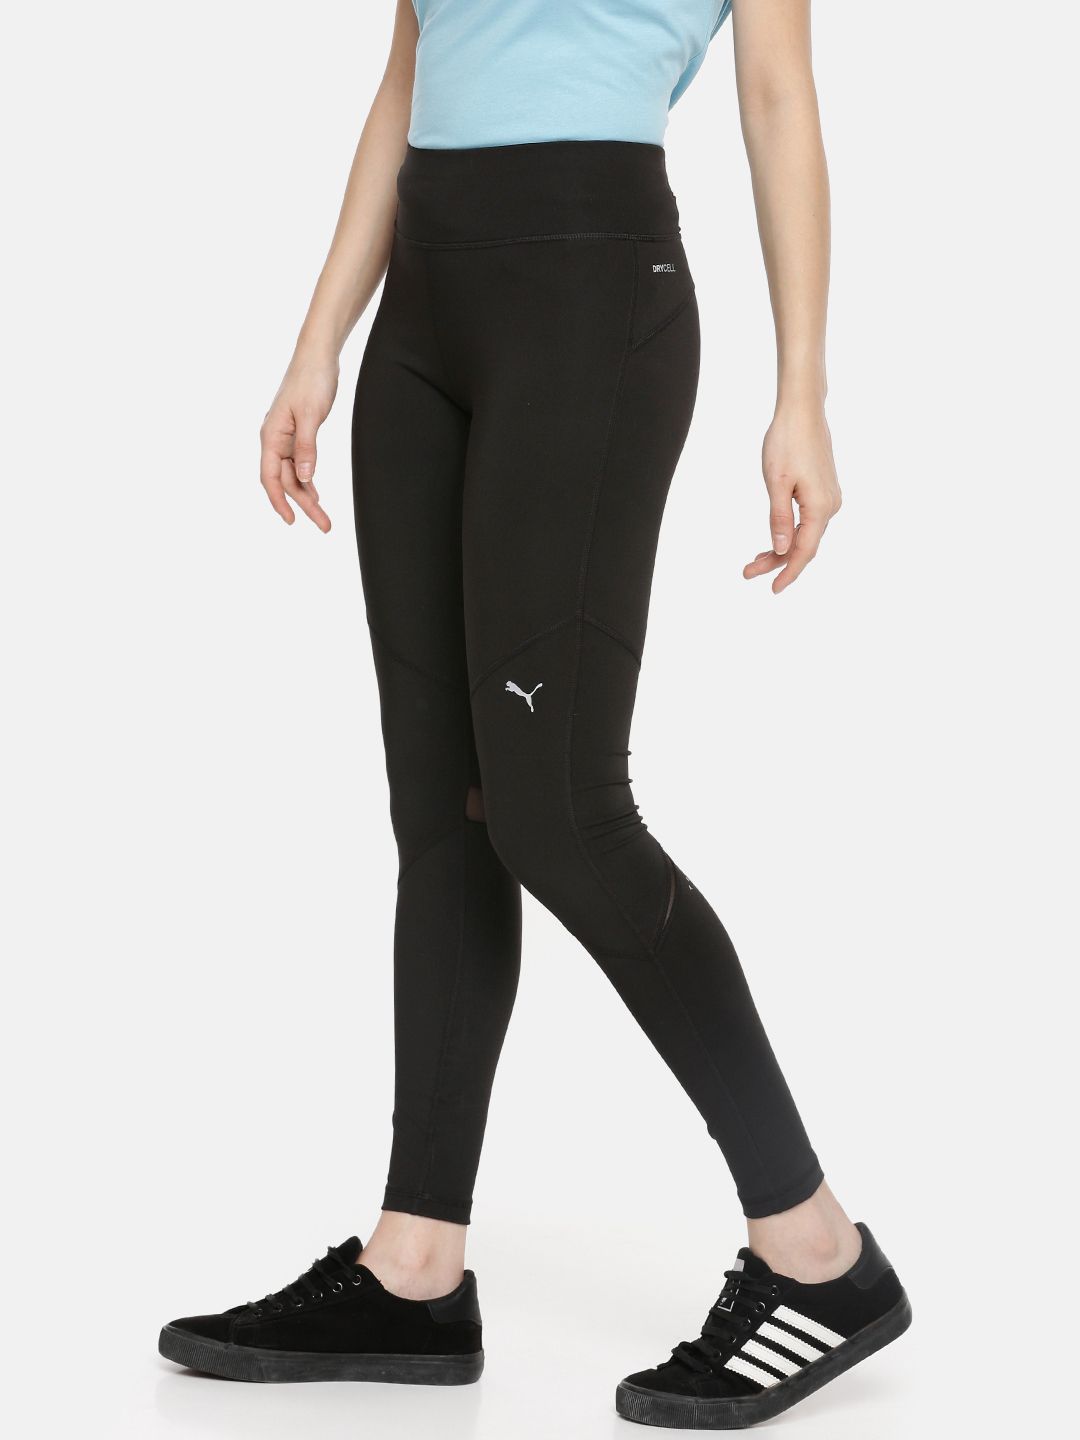 Puma Women Black Solid Ignite DRY-CELL Running & Training Tights Price in India